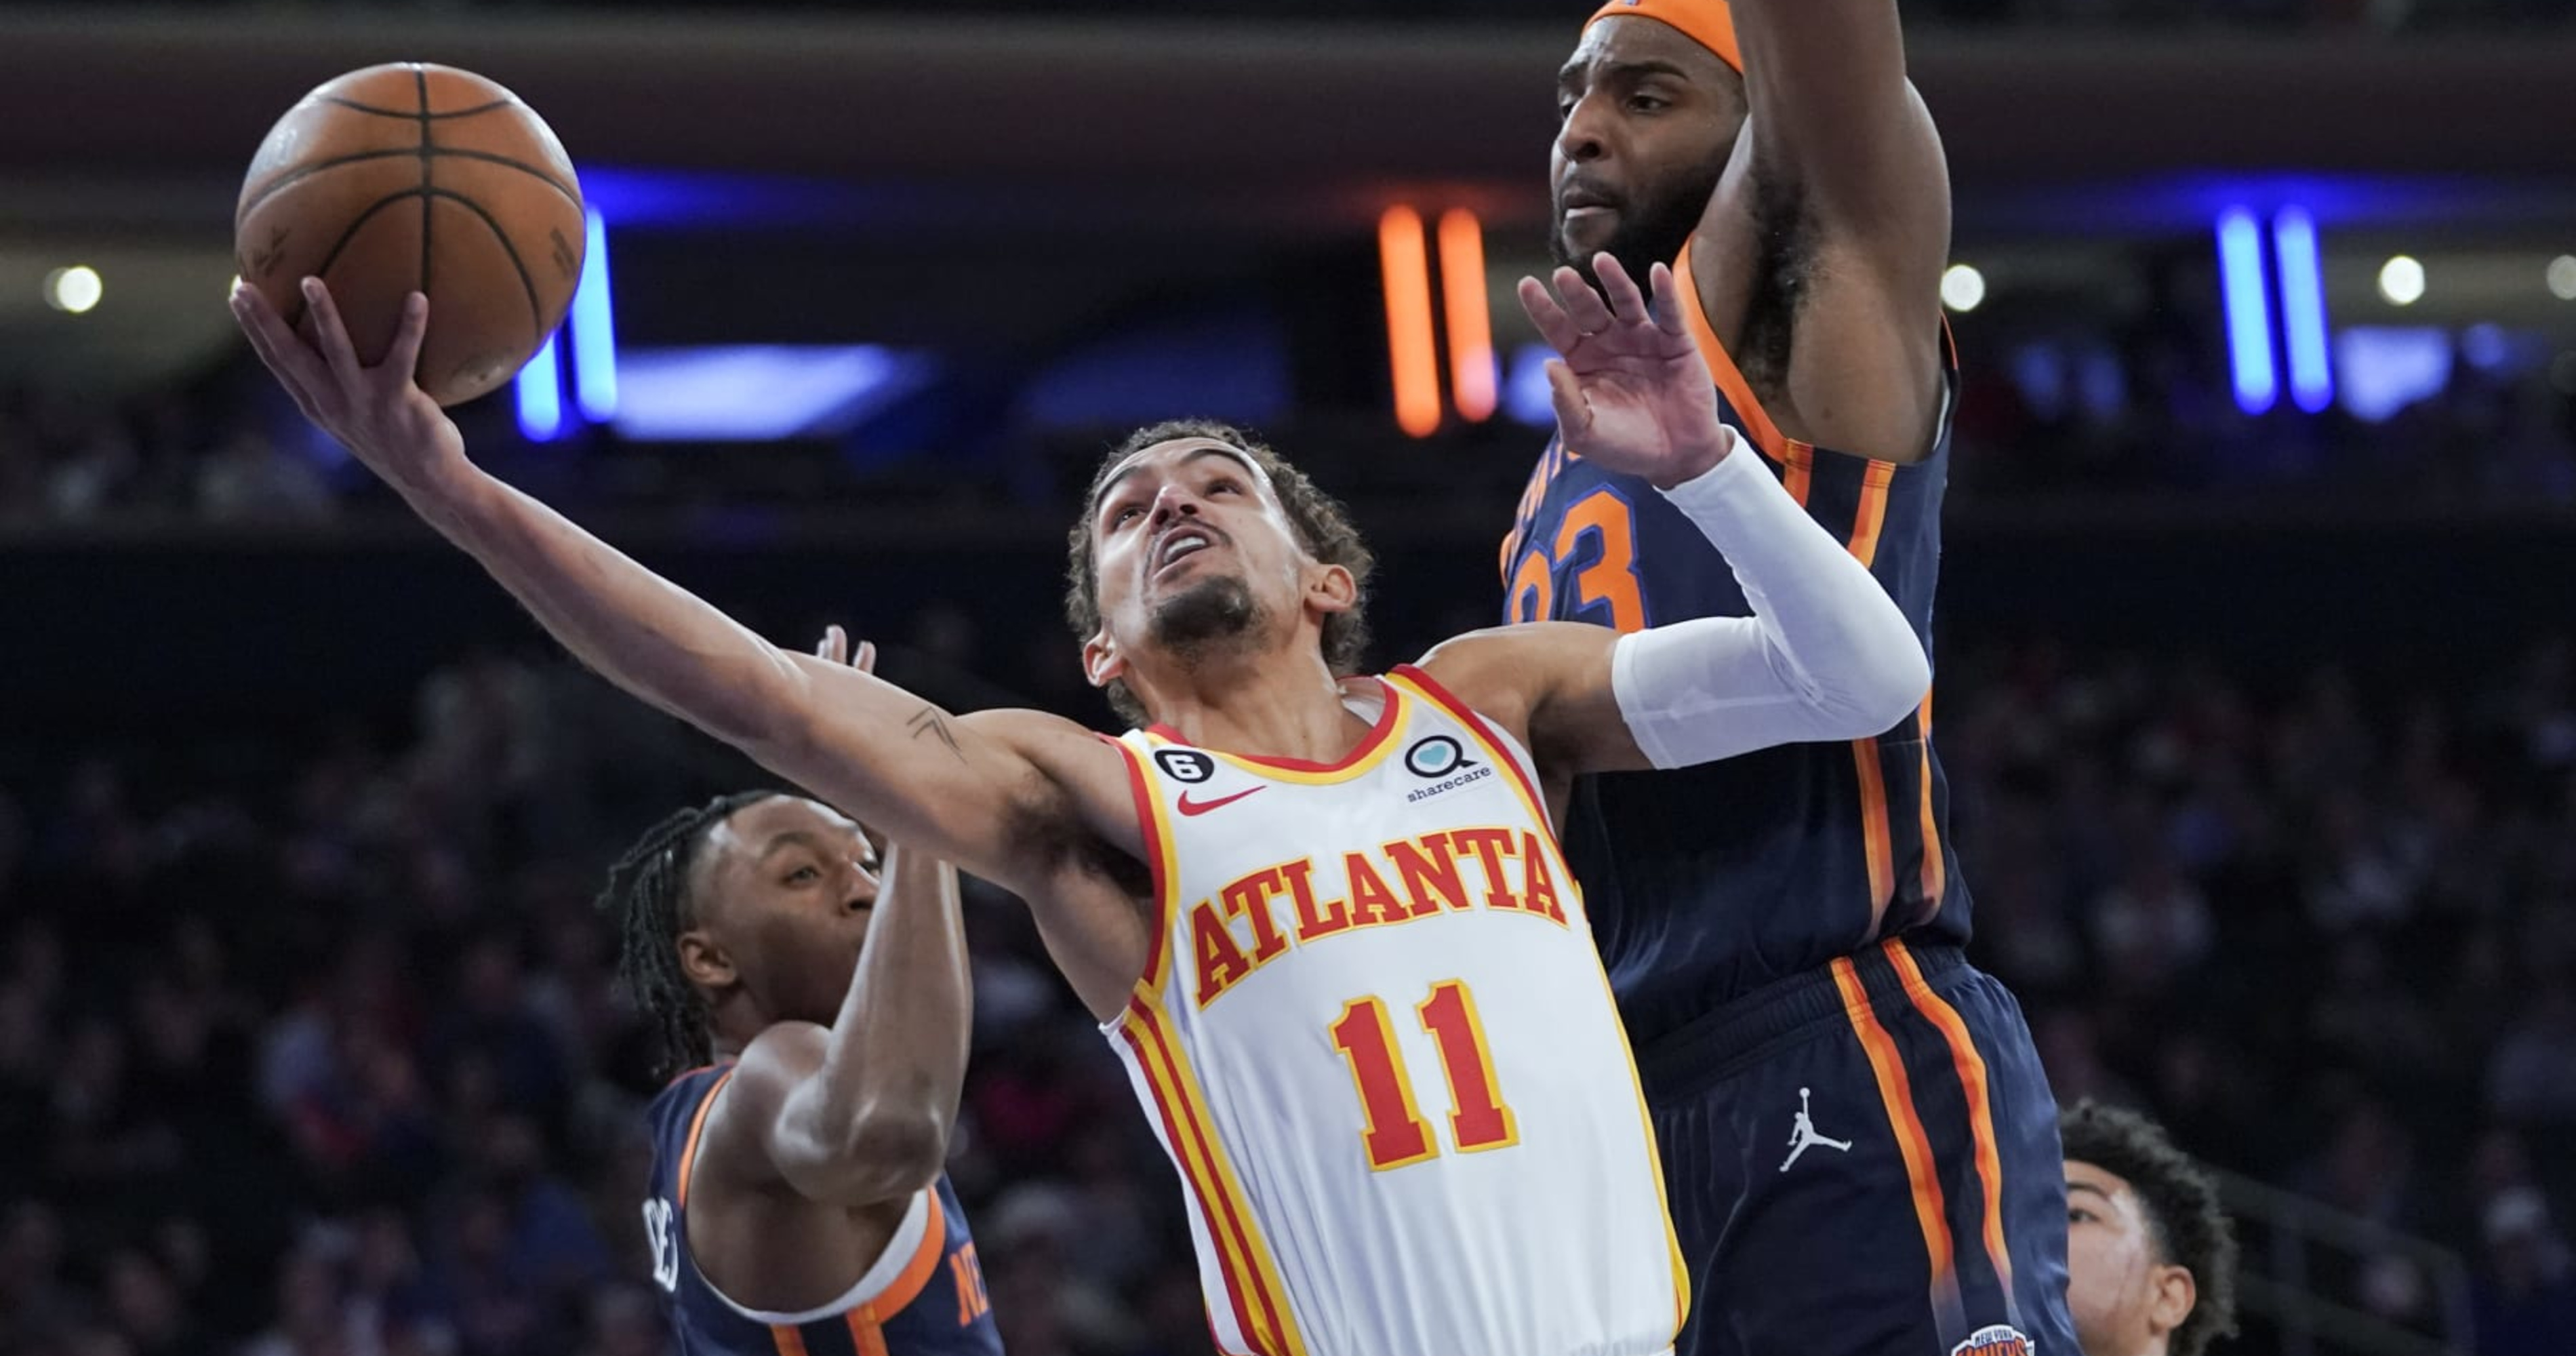 Trae Young continues to haunt the Knicks, Bucks hit top gear